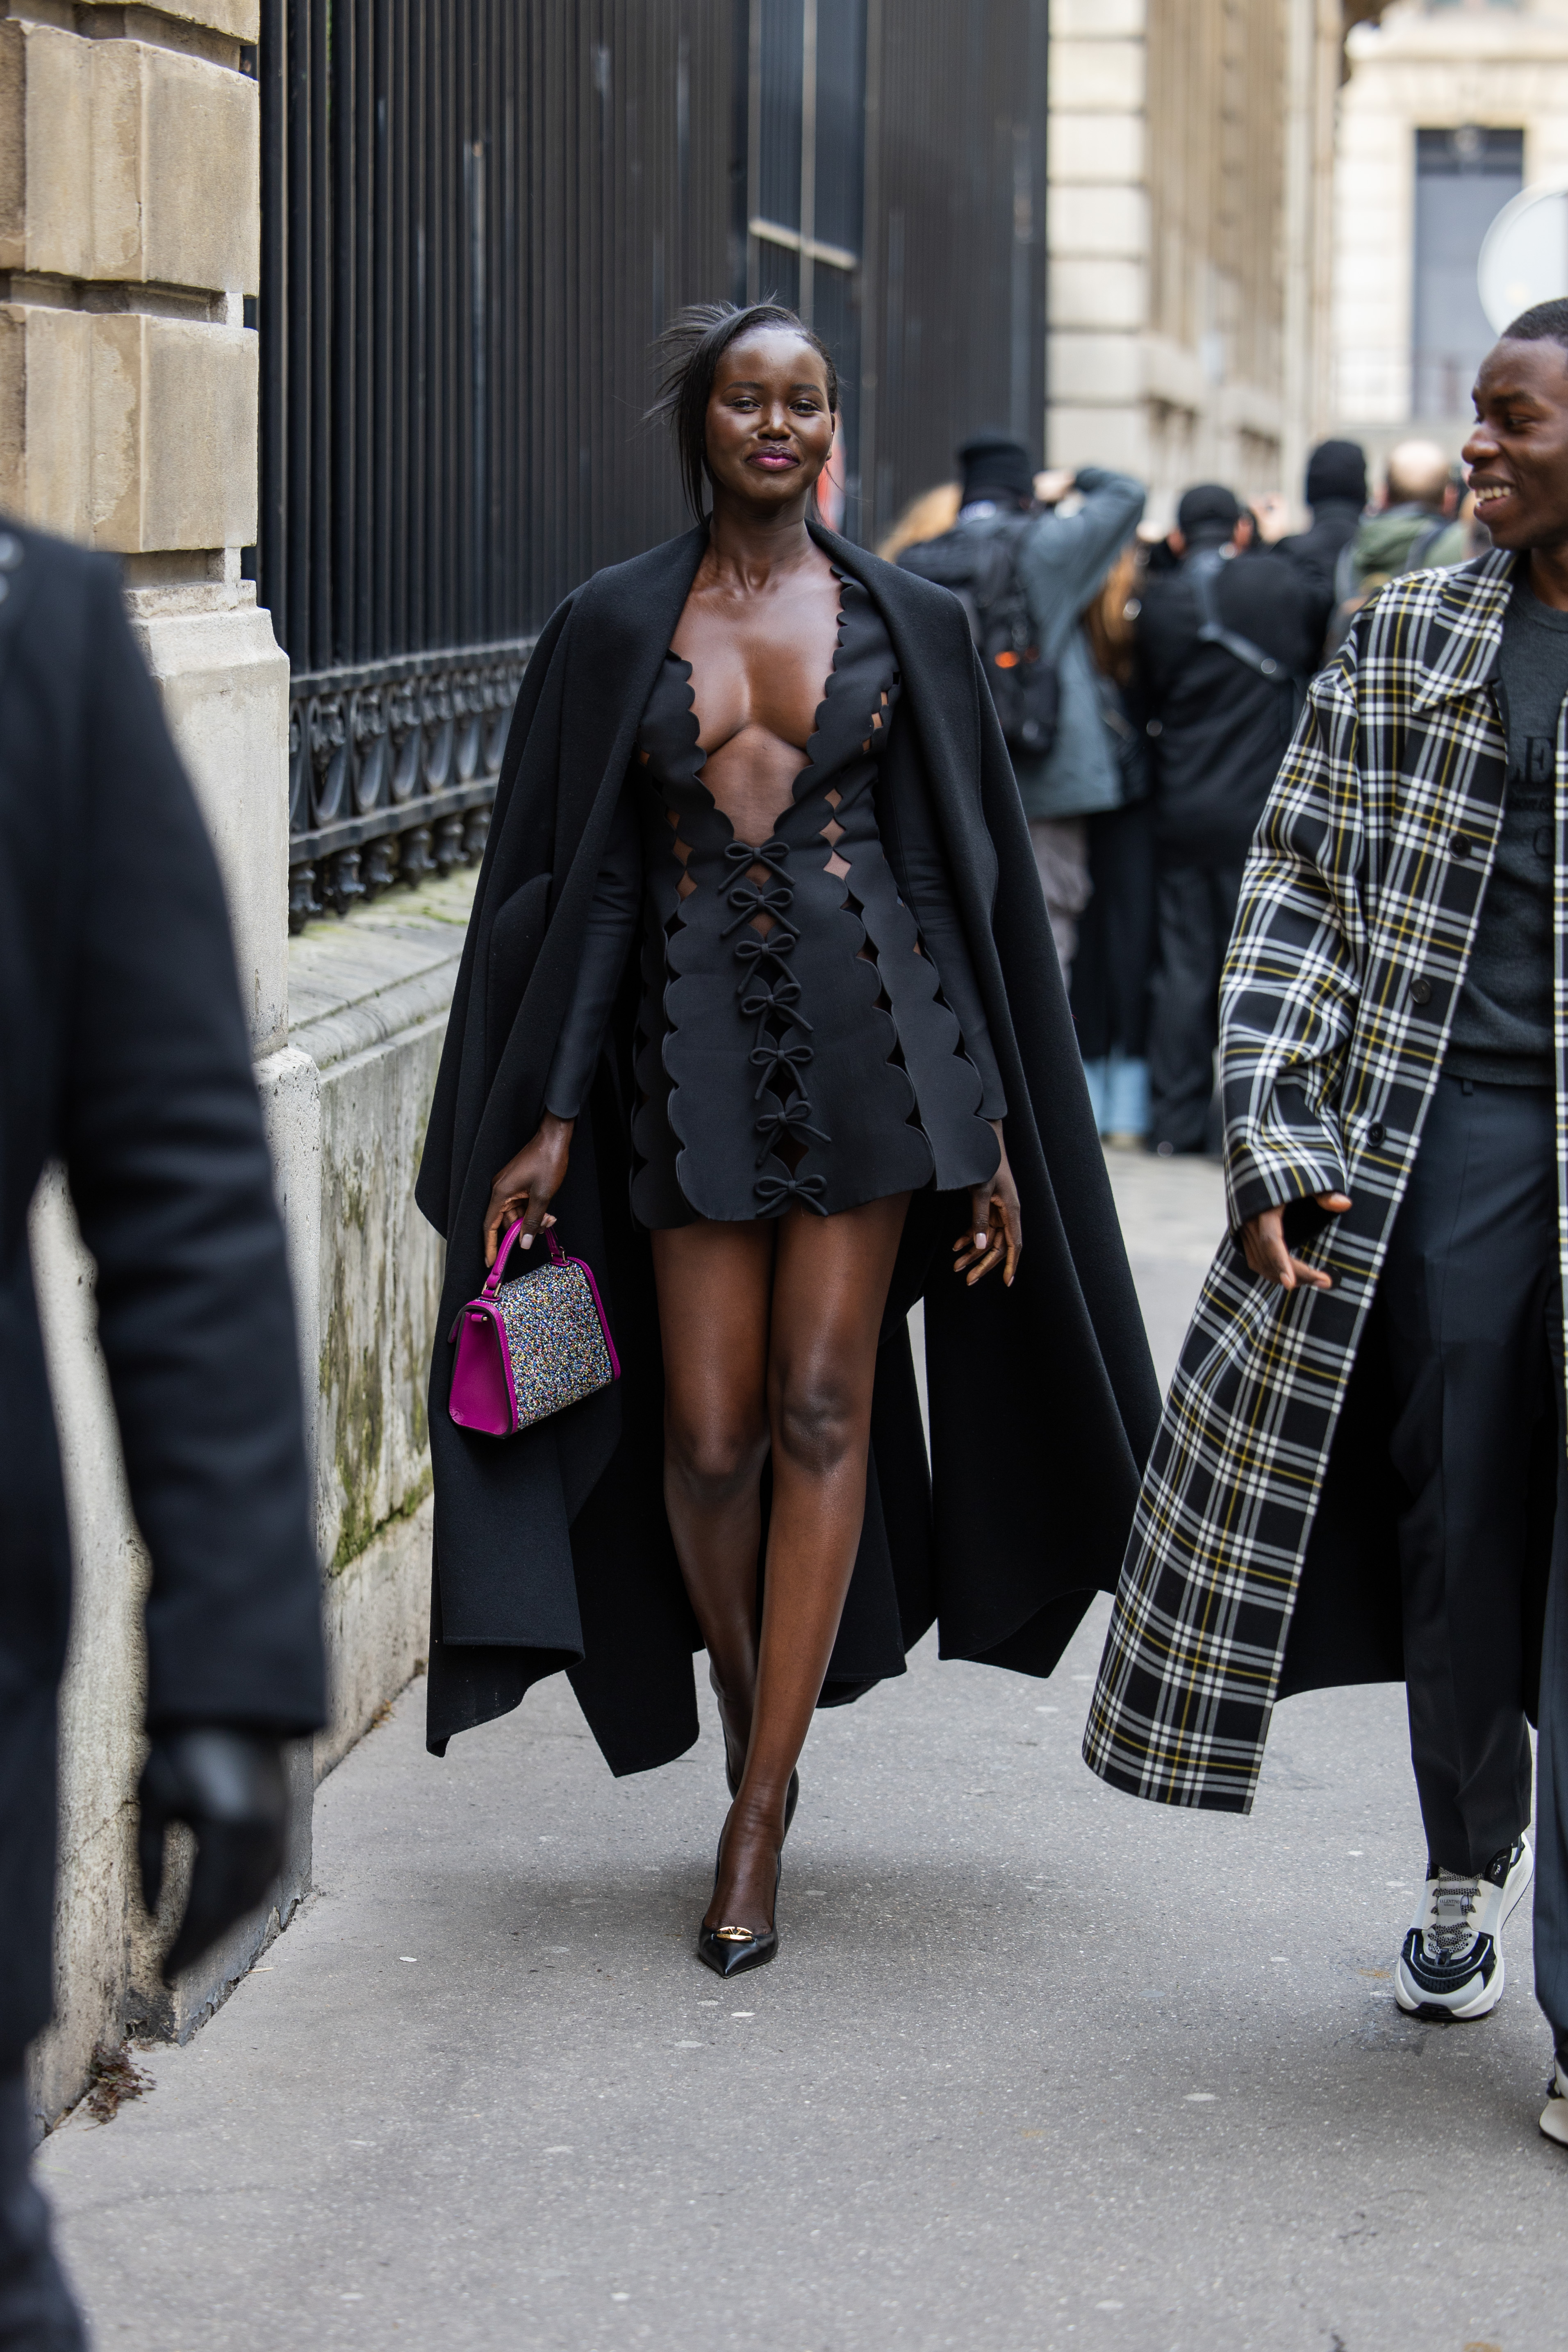 Adut Akech wears a black cut-out dress and long coat while attending Paris Fashion Week on March 3